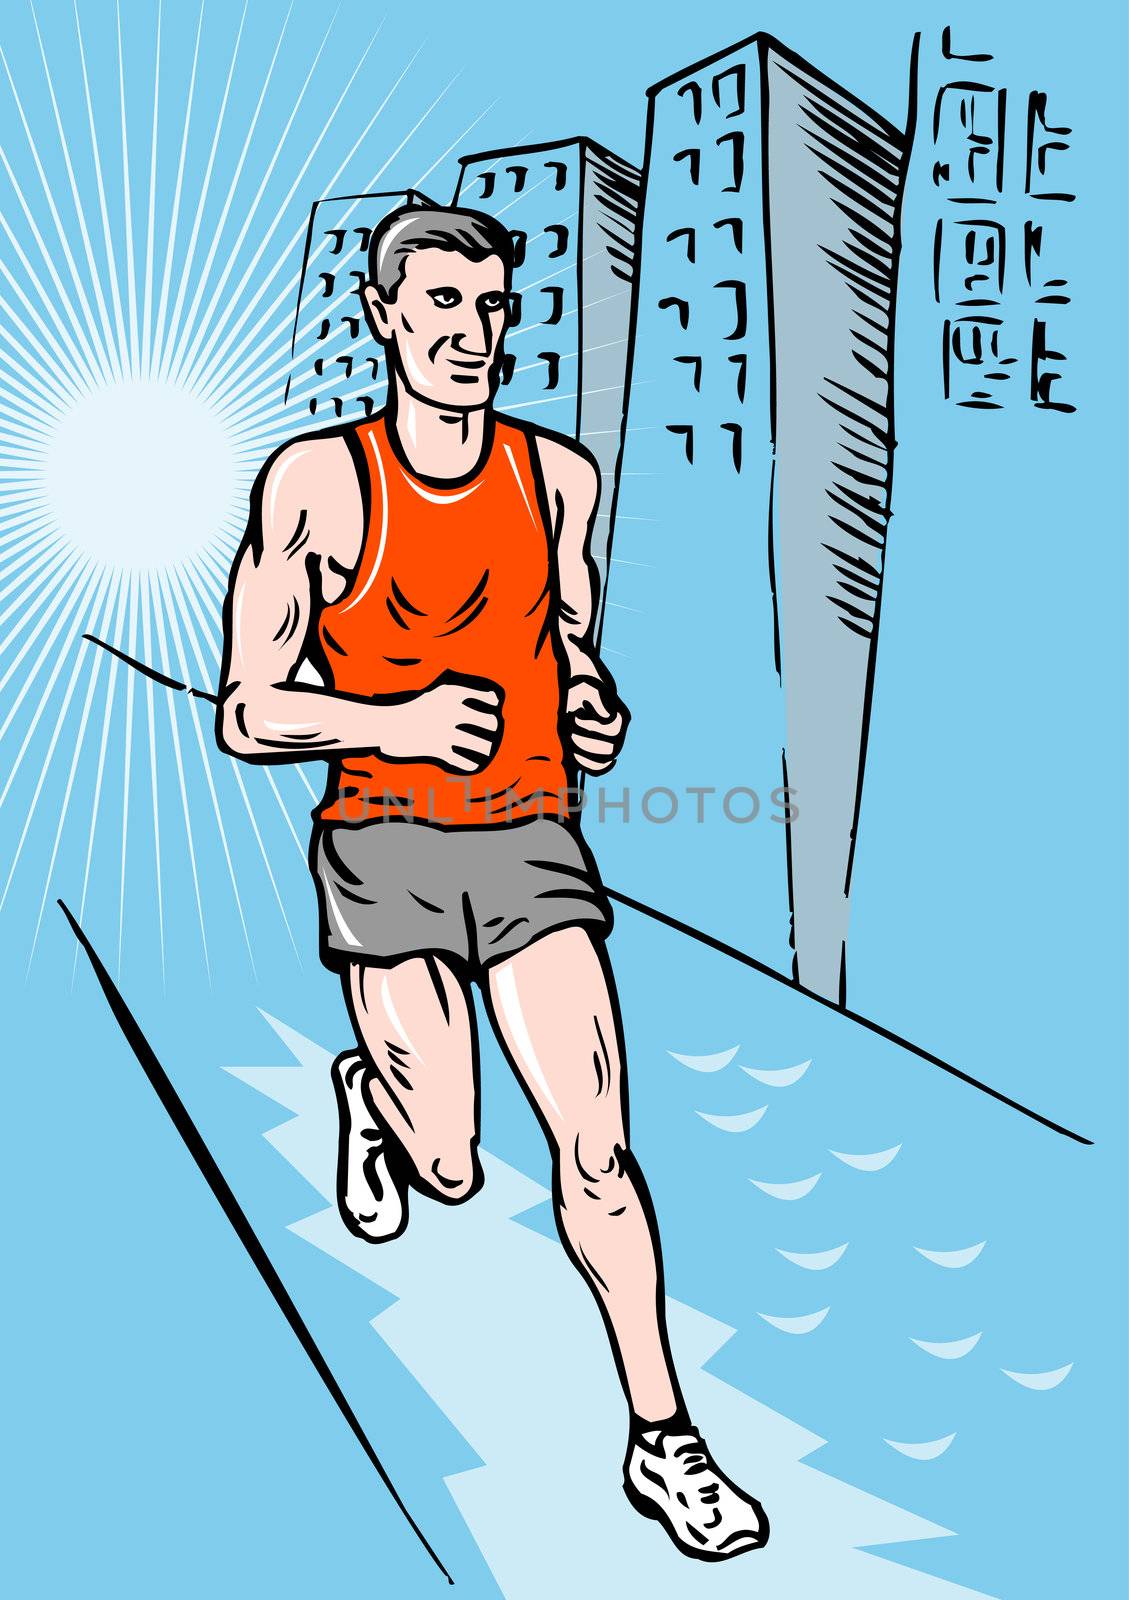 sketch style illustration of a jogger or marathon runner running race in street with buildings in background